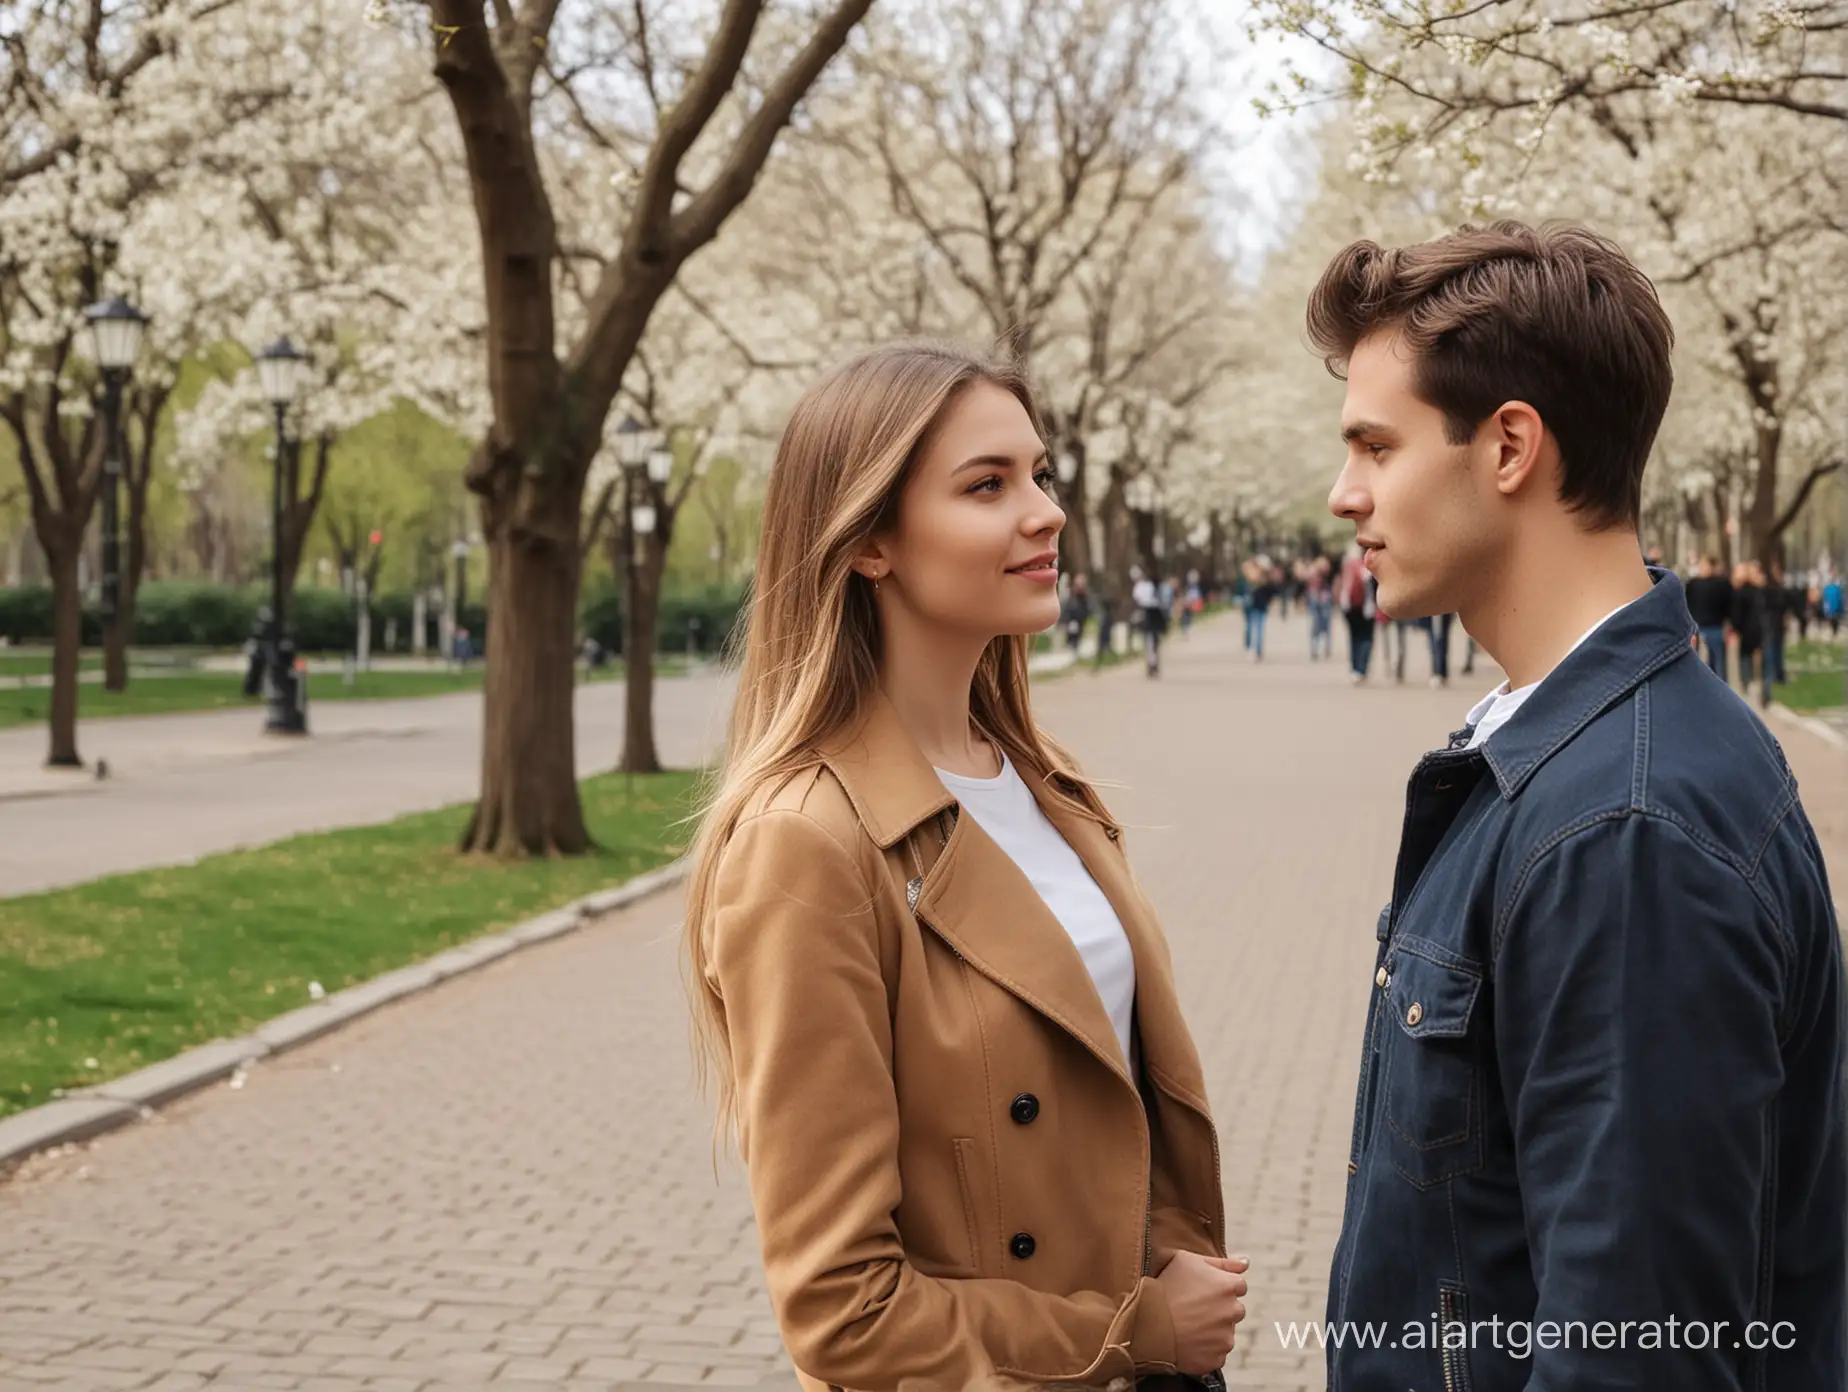 2 models, a beautiful girl listens to a guy, a guy wants to meet her, they talk, street, spring, trees, park